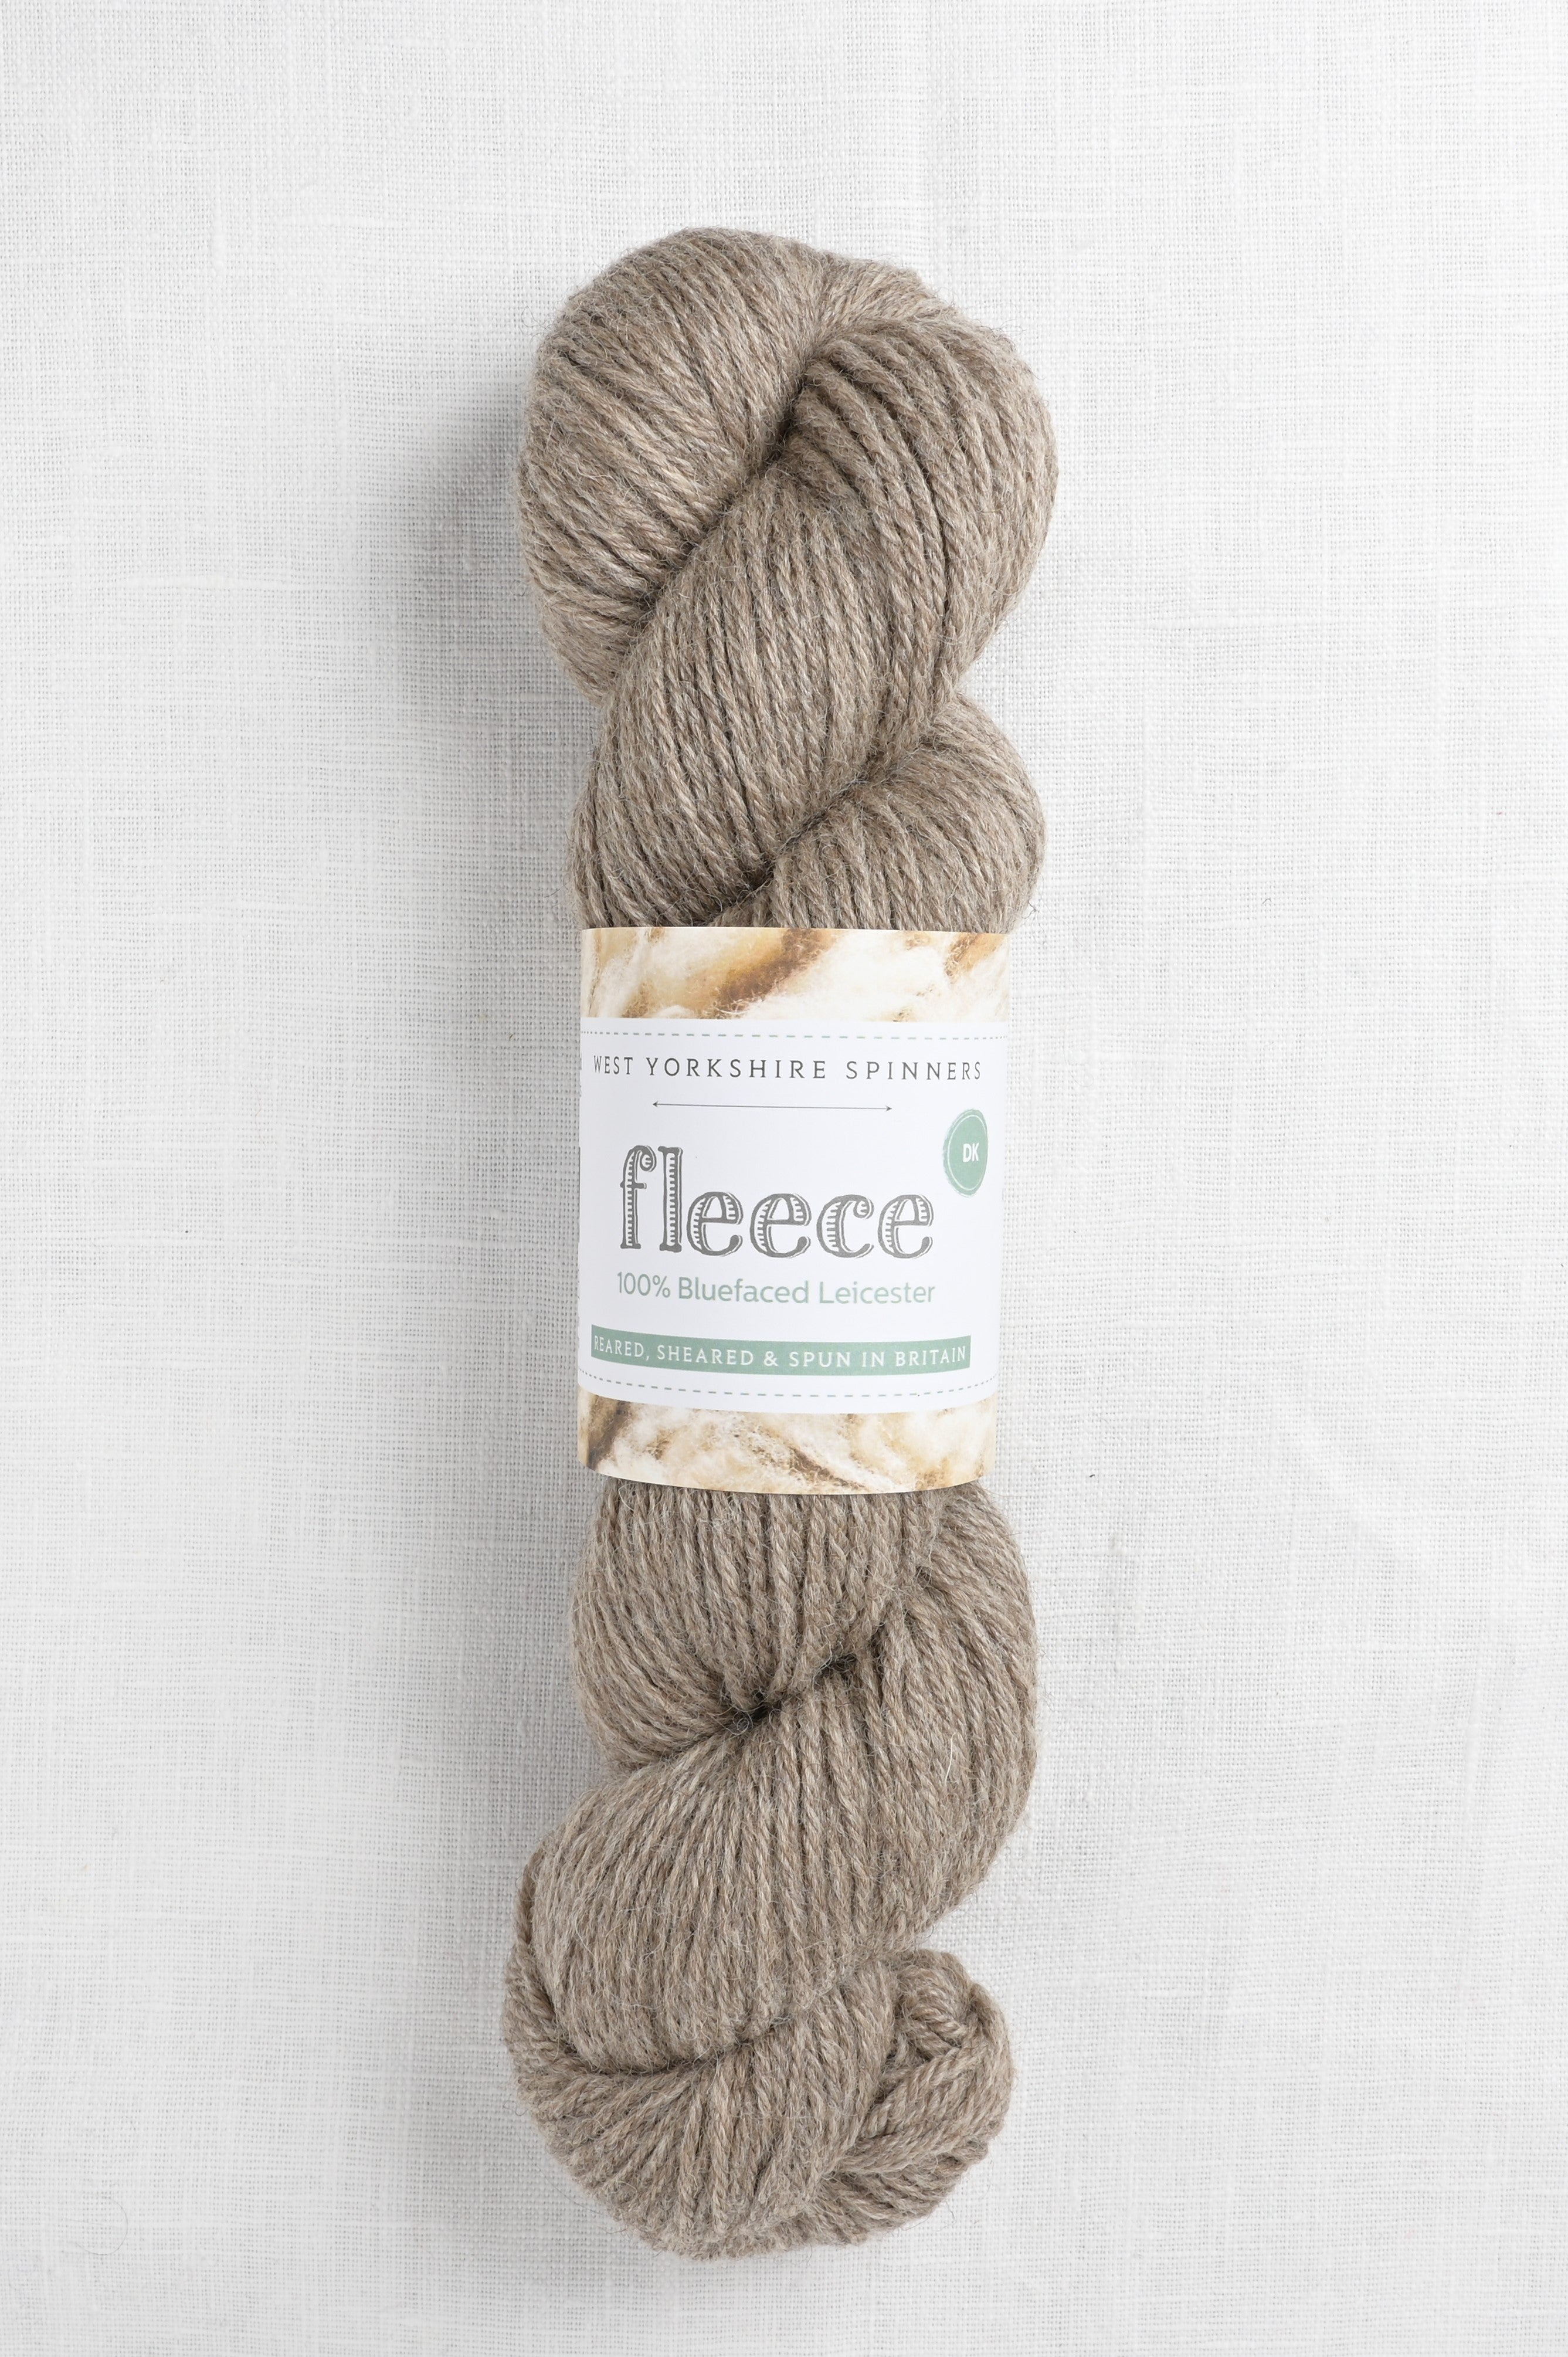 Fleece Bluefaced Leicester DK – Riverside Collection — Needles in